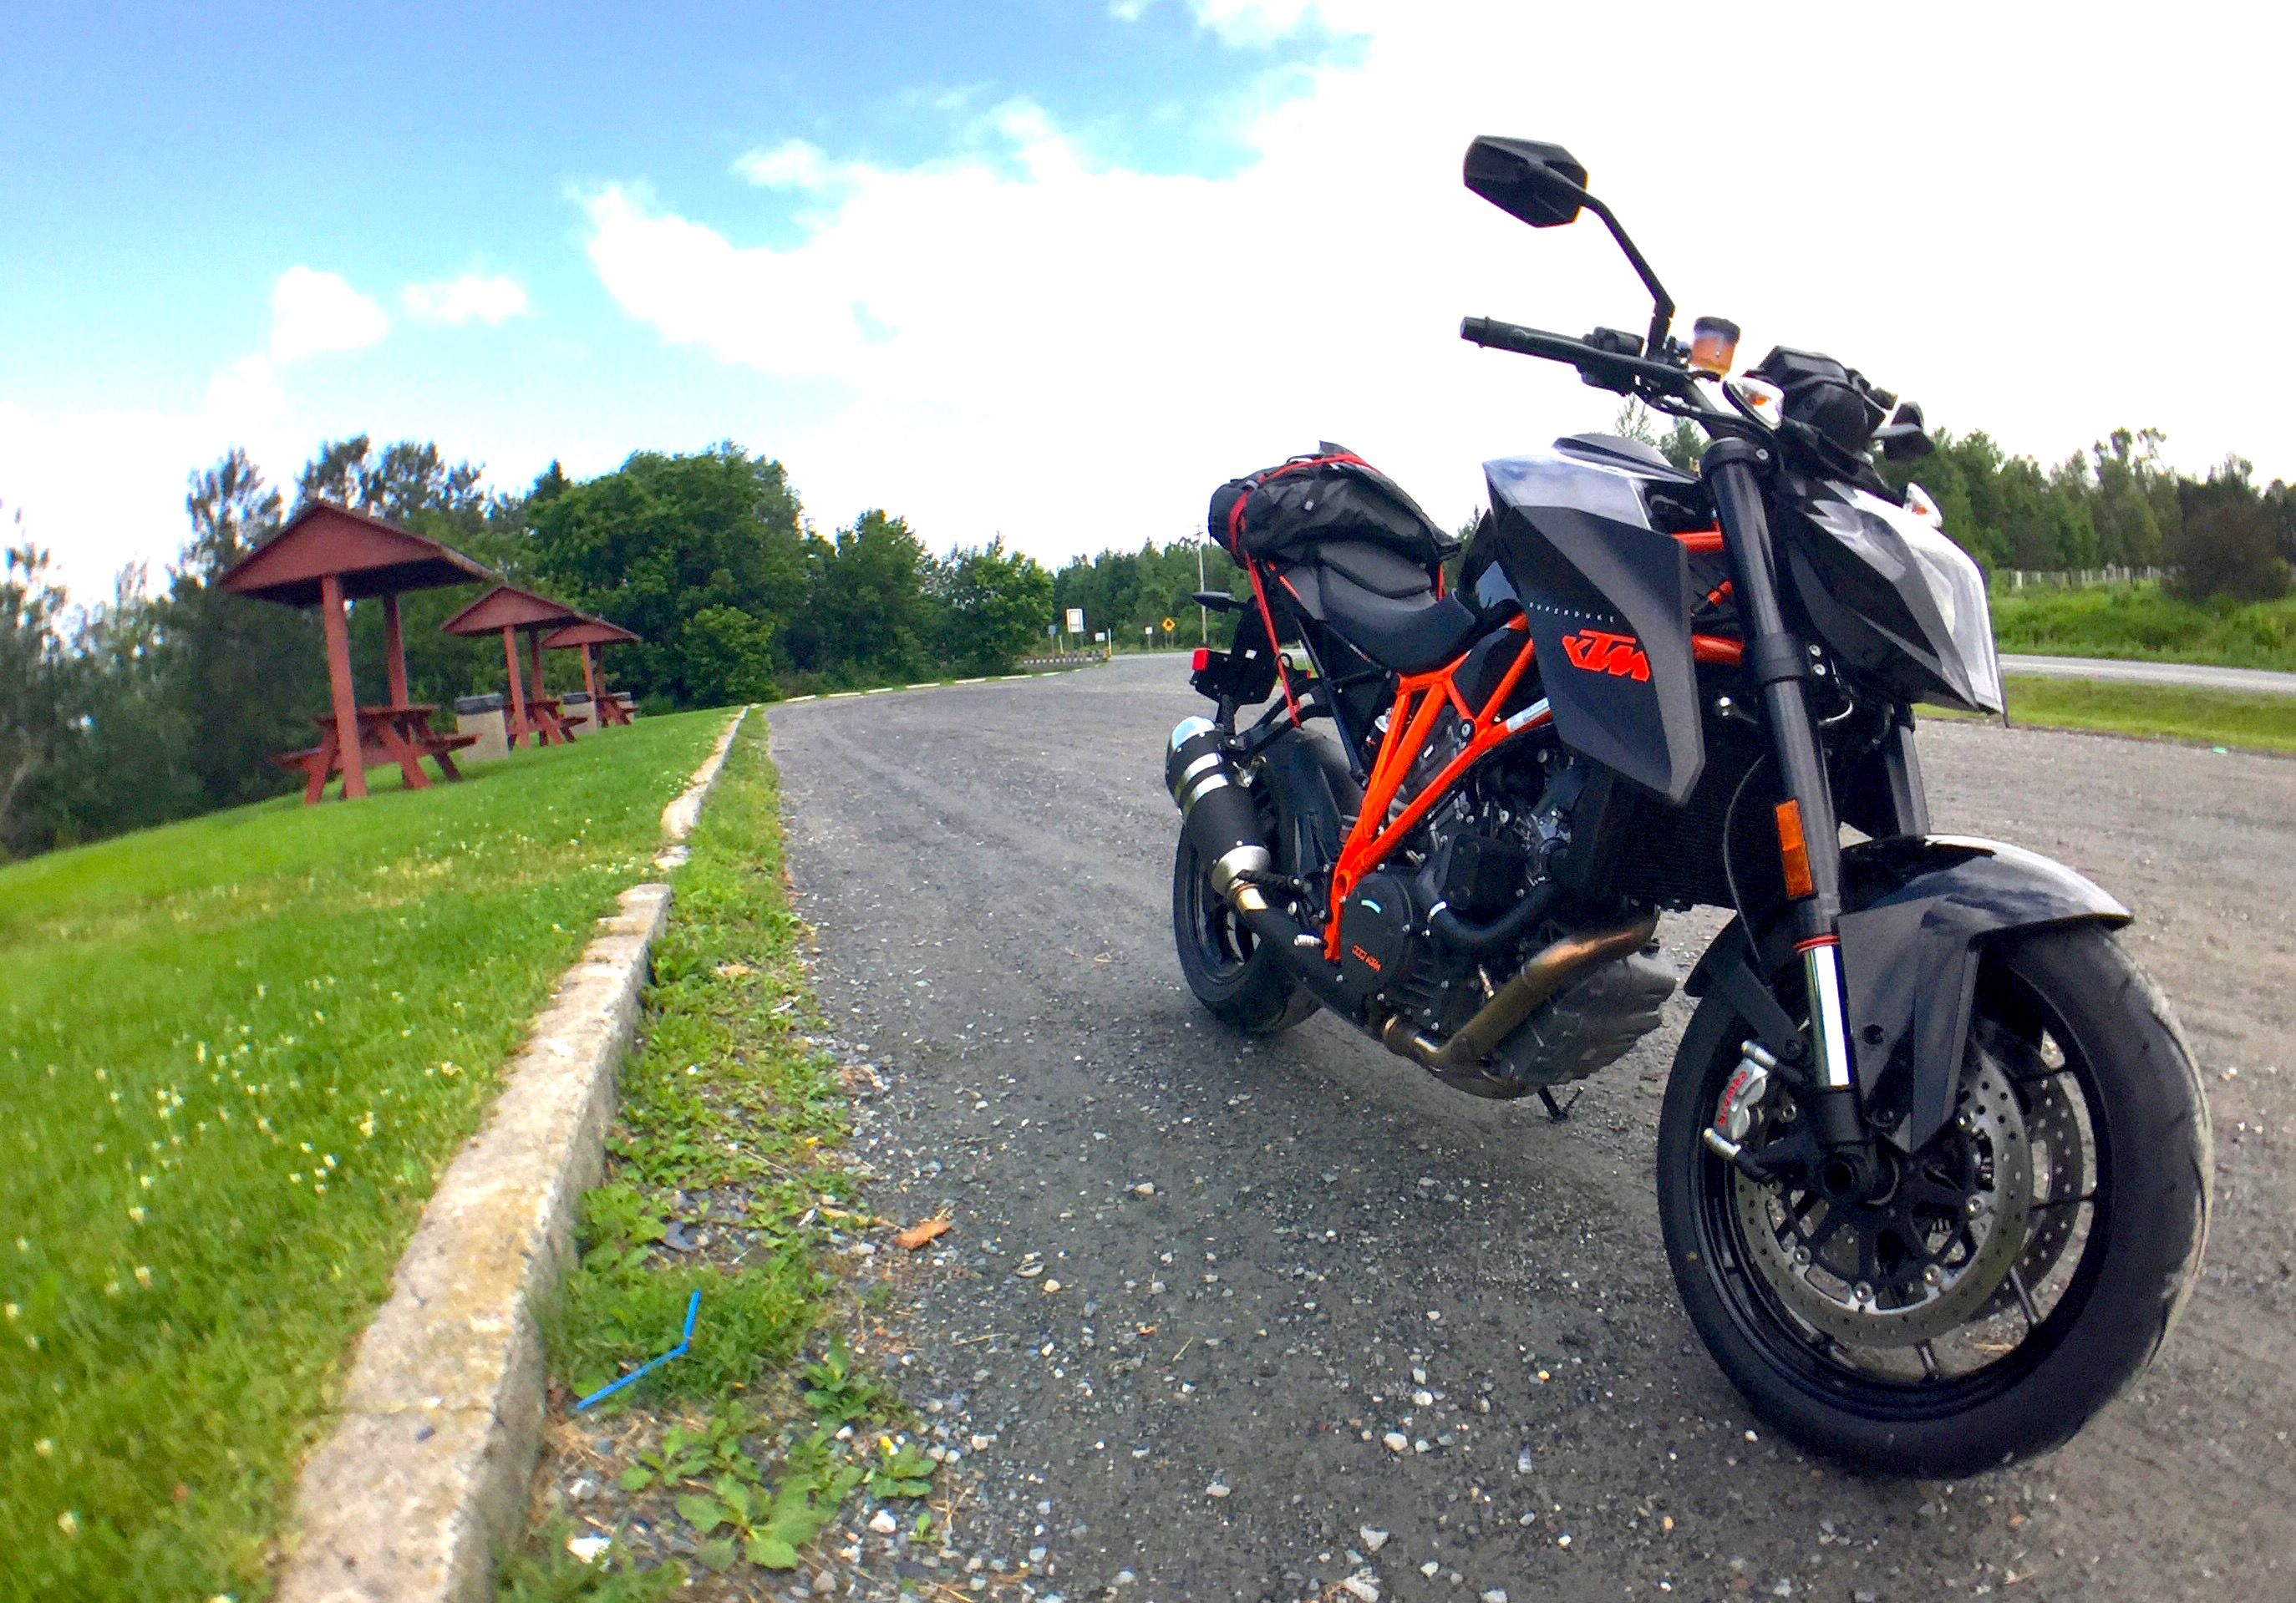 Introducing the KTM SuperDuke 1290R beauty and muscle